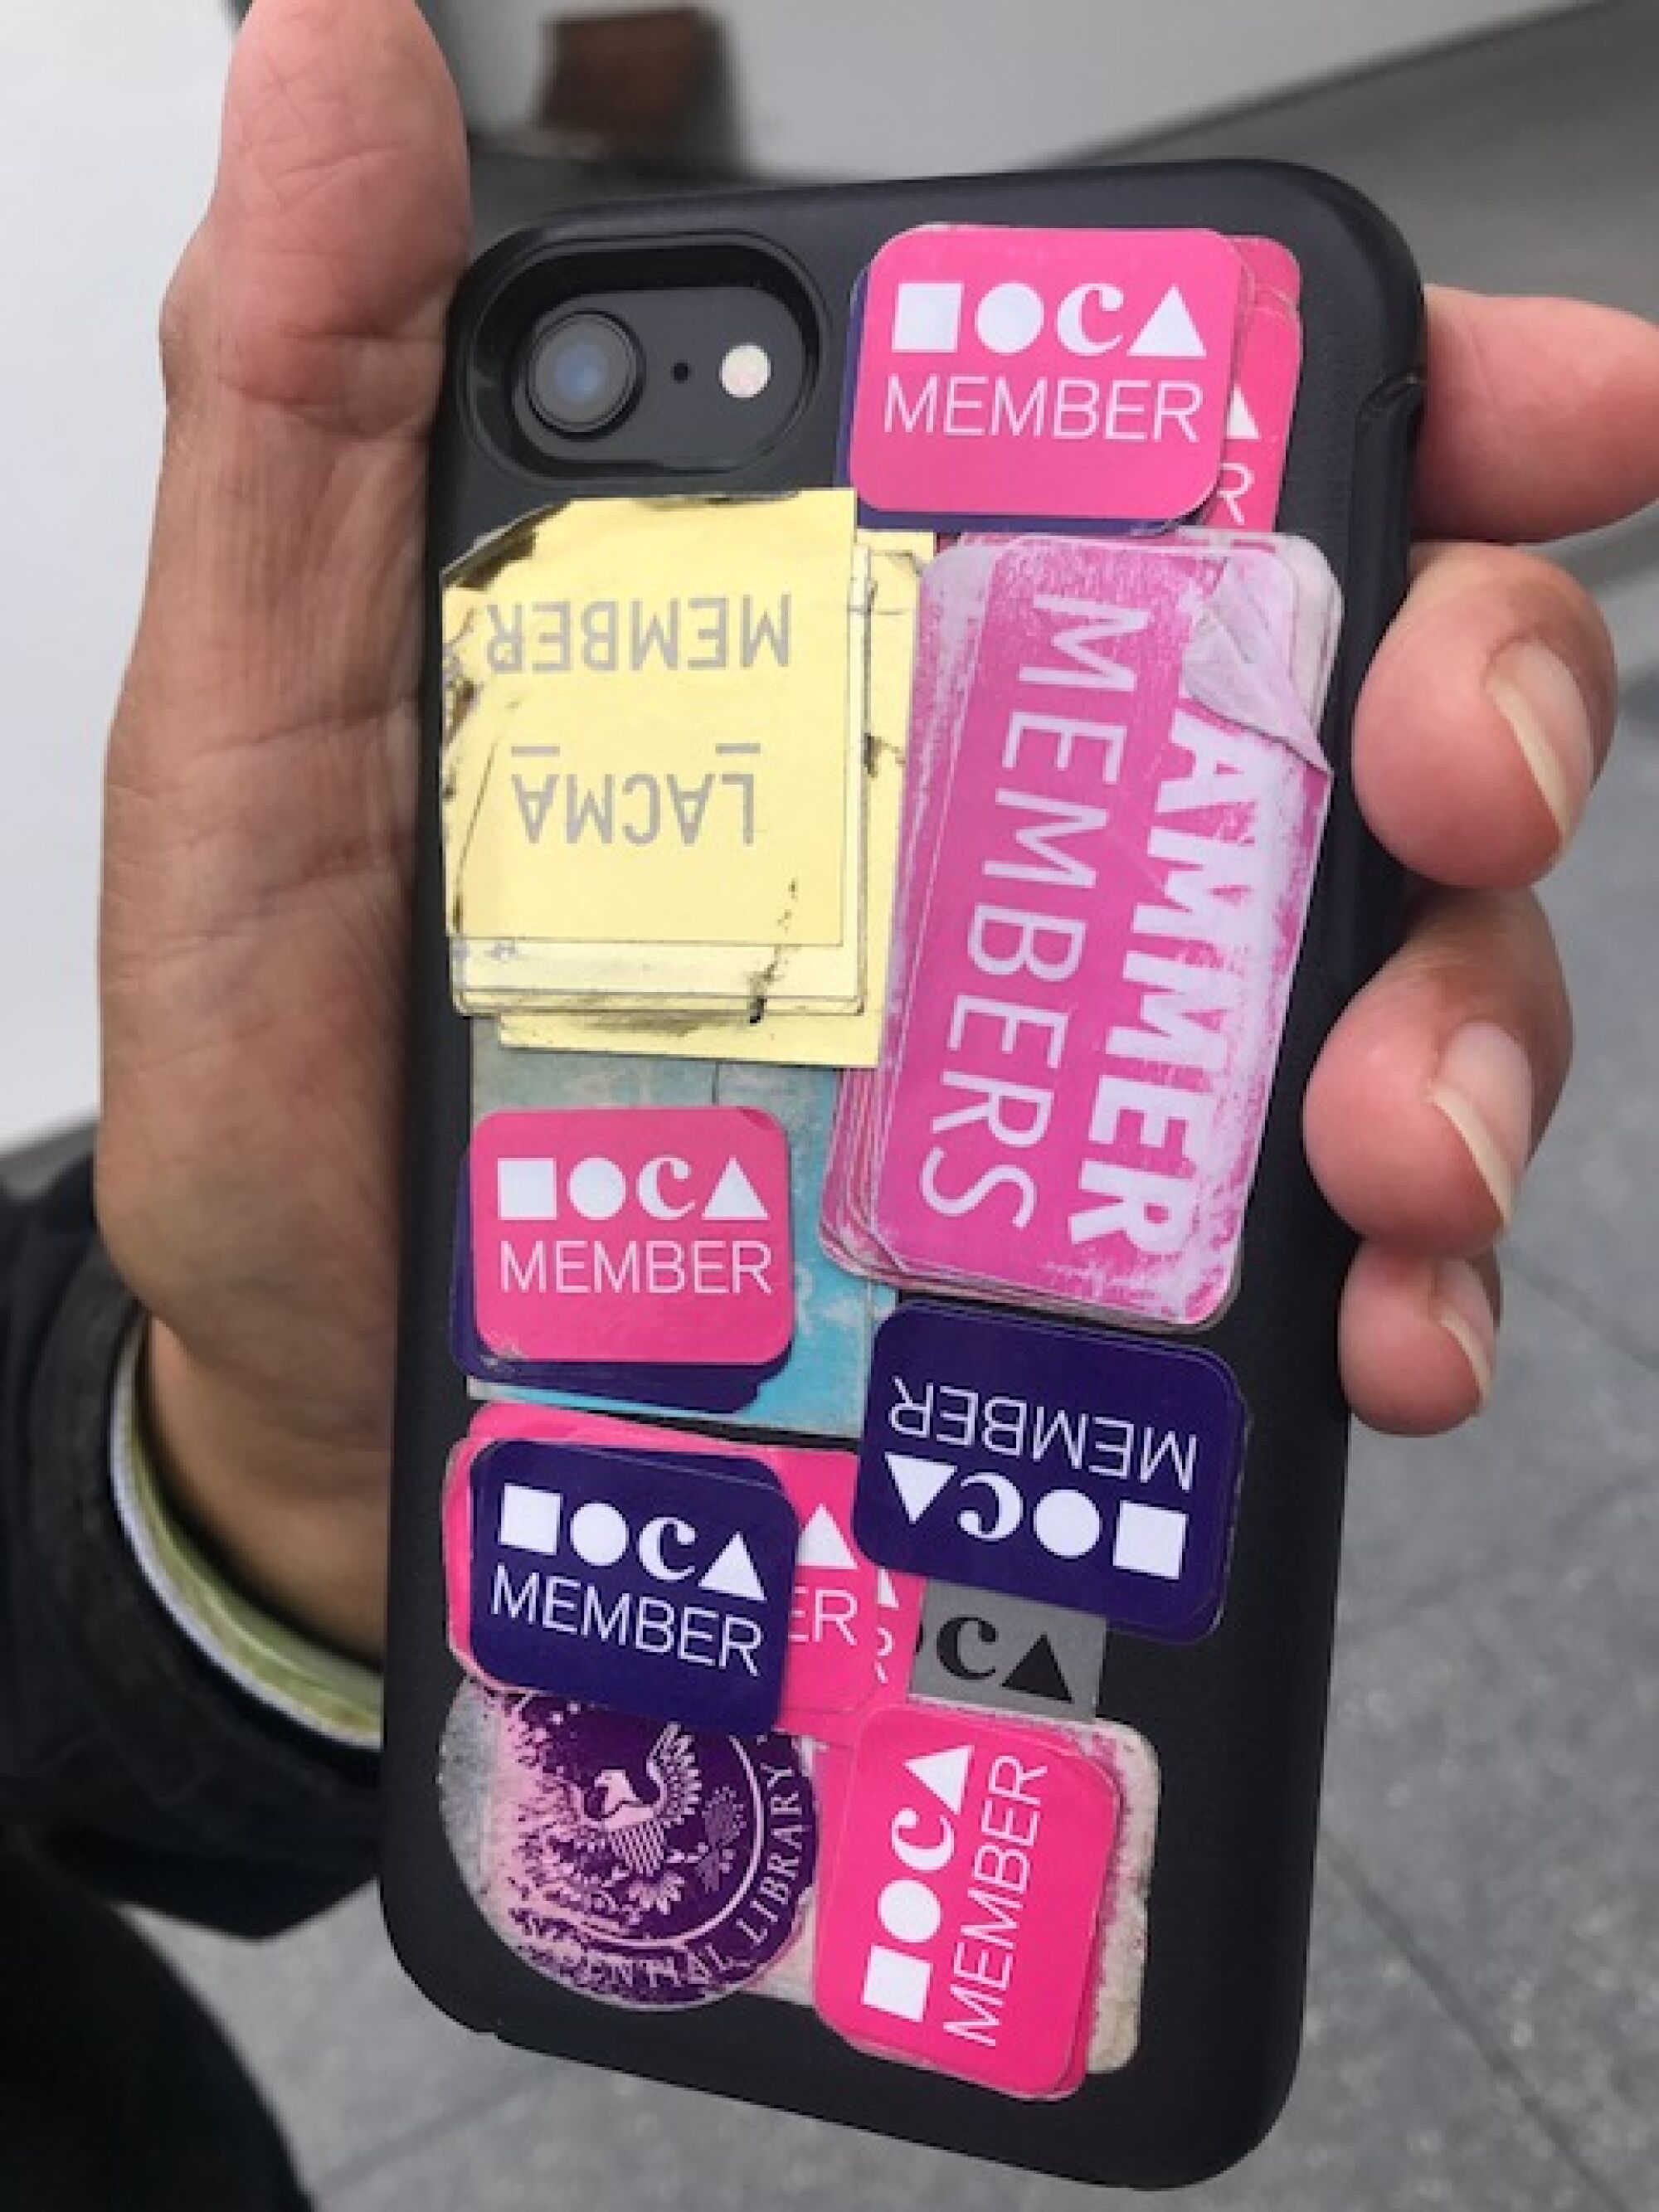 The back of Ben Barcelona's phone, which features layers of museum membership stickers, a testament to his devotion.